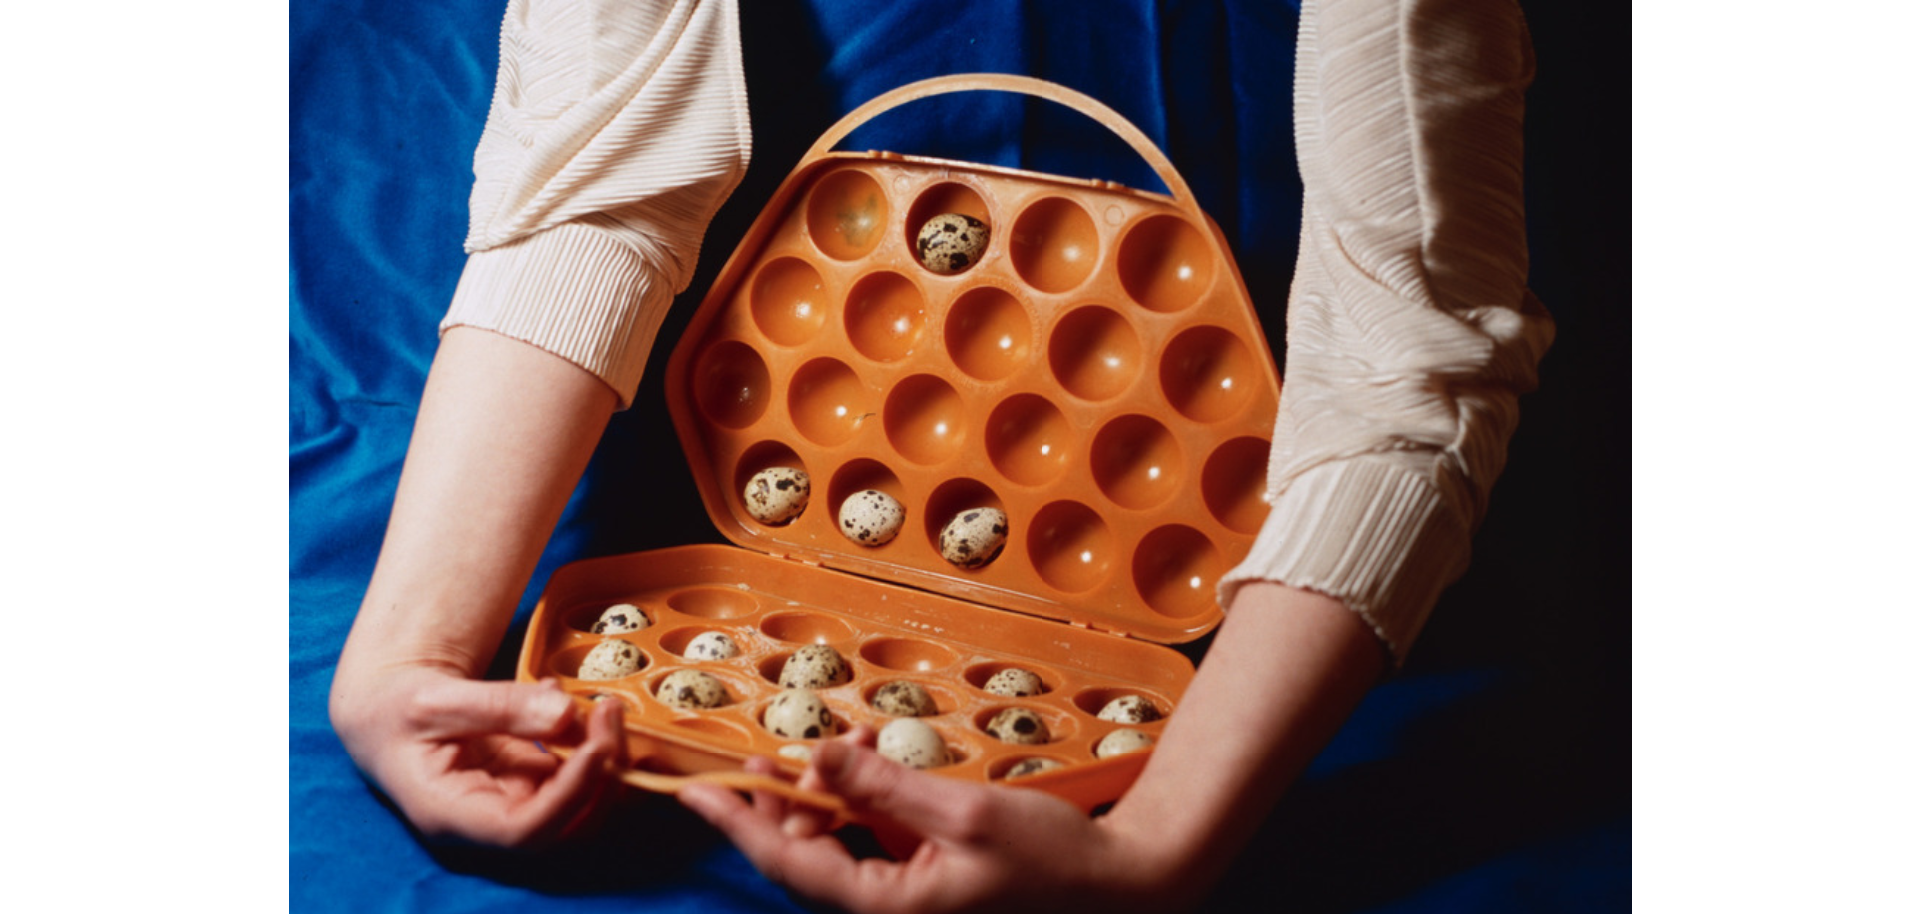 A photograph displaying an open orange egg bag with quails eggs inside which is being cradled by a pair of arms which descend from above.